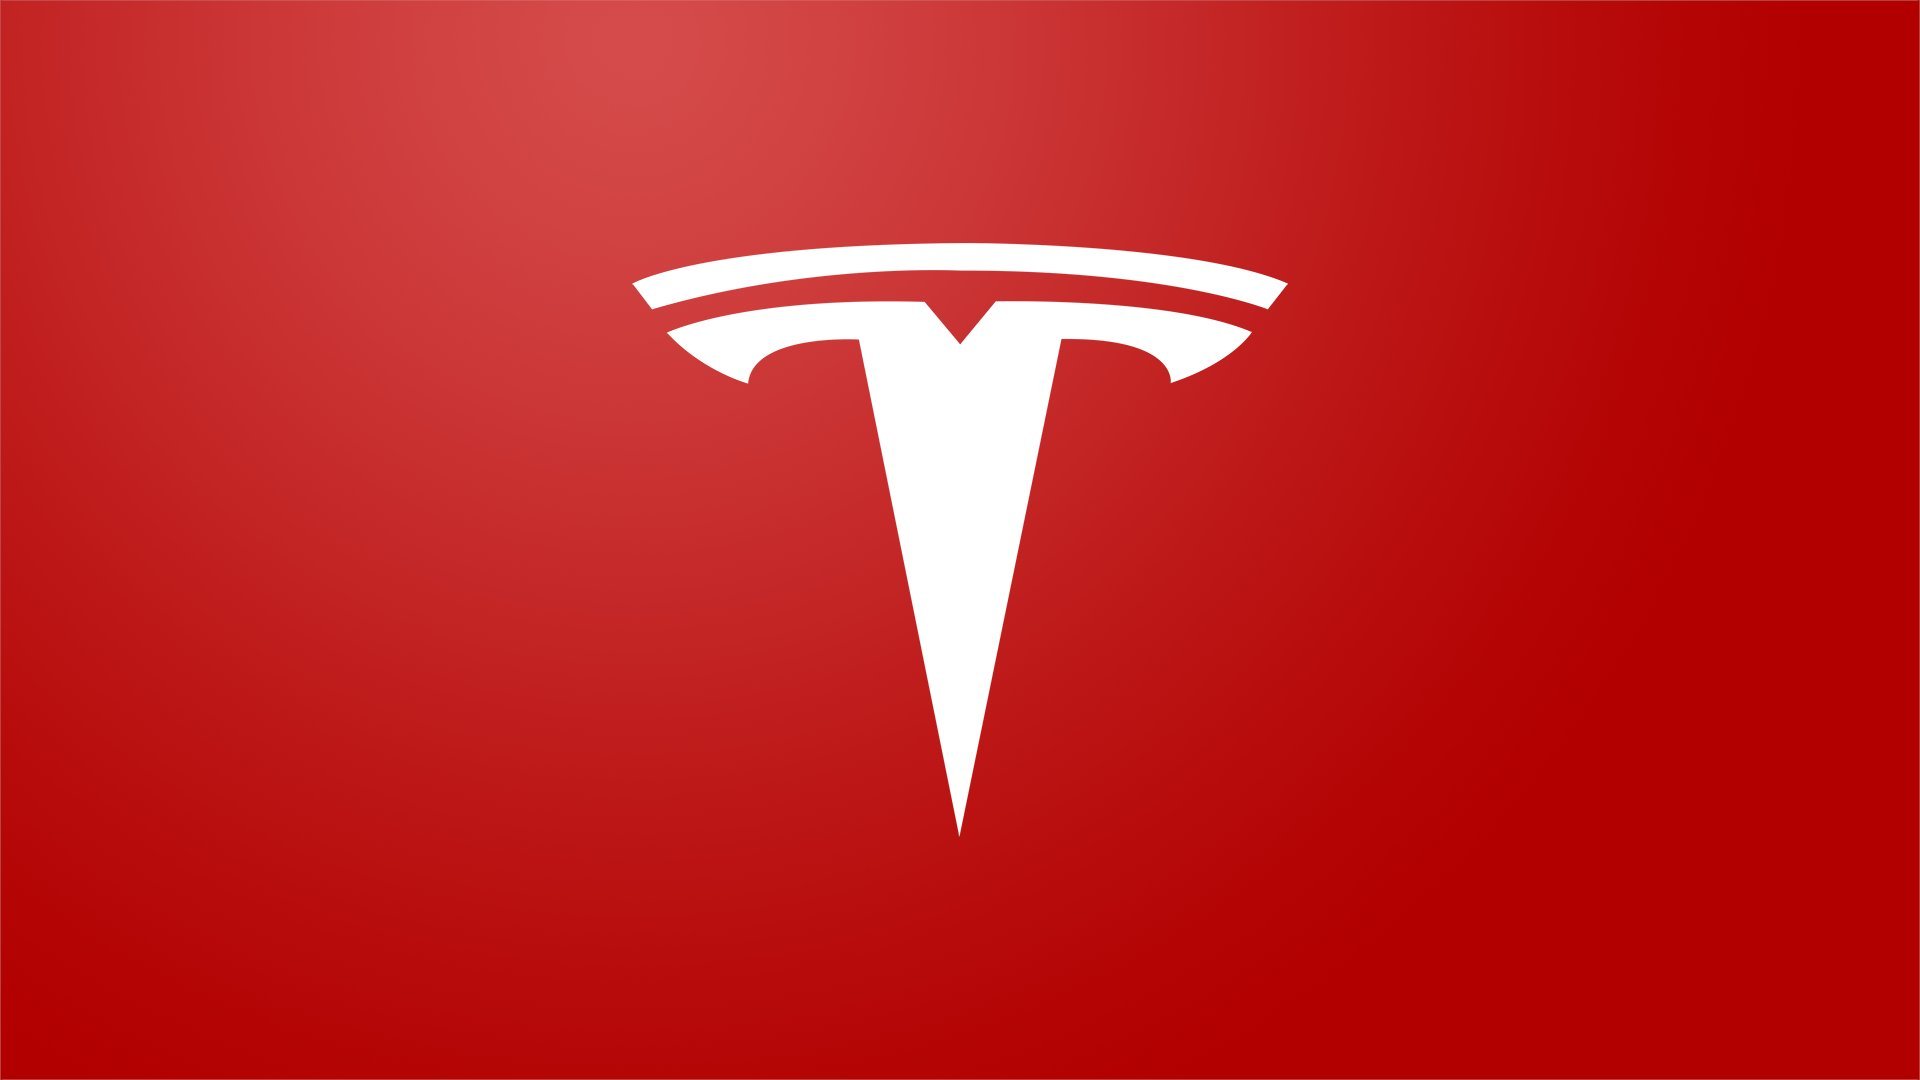 This is a Tesla enthusiast account not affiliated with @Tesla. Curated by @TimOster https://t.co/mLU6aiixzK